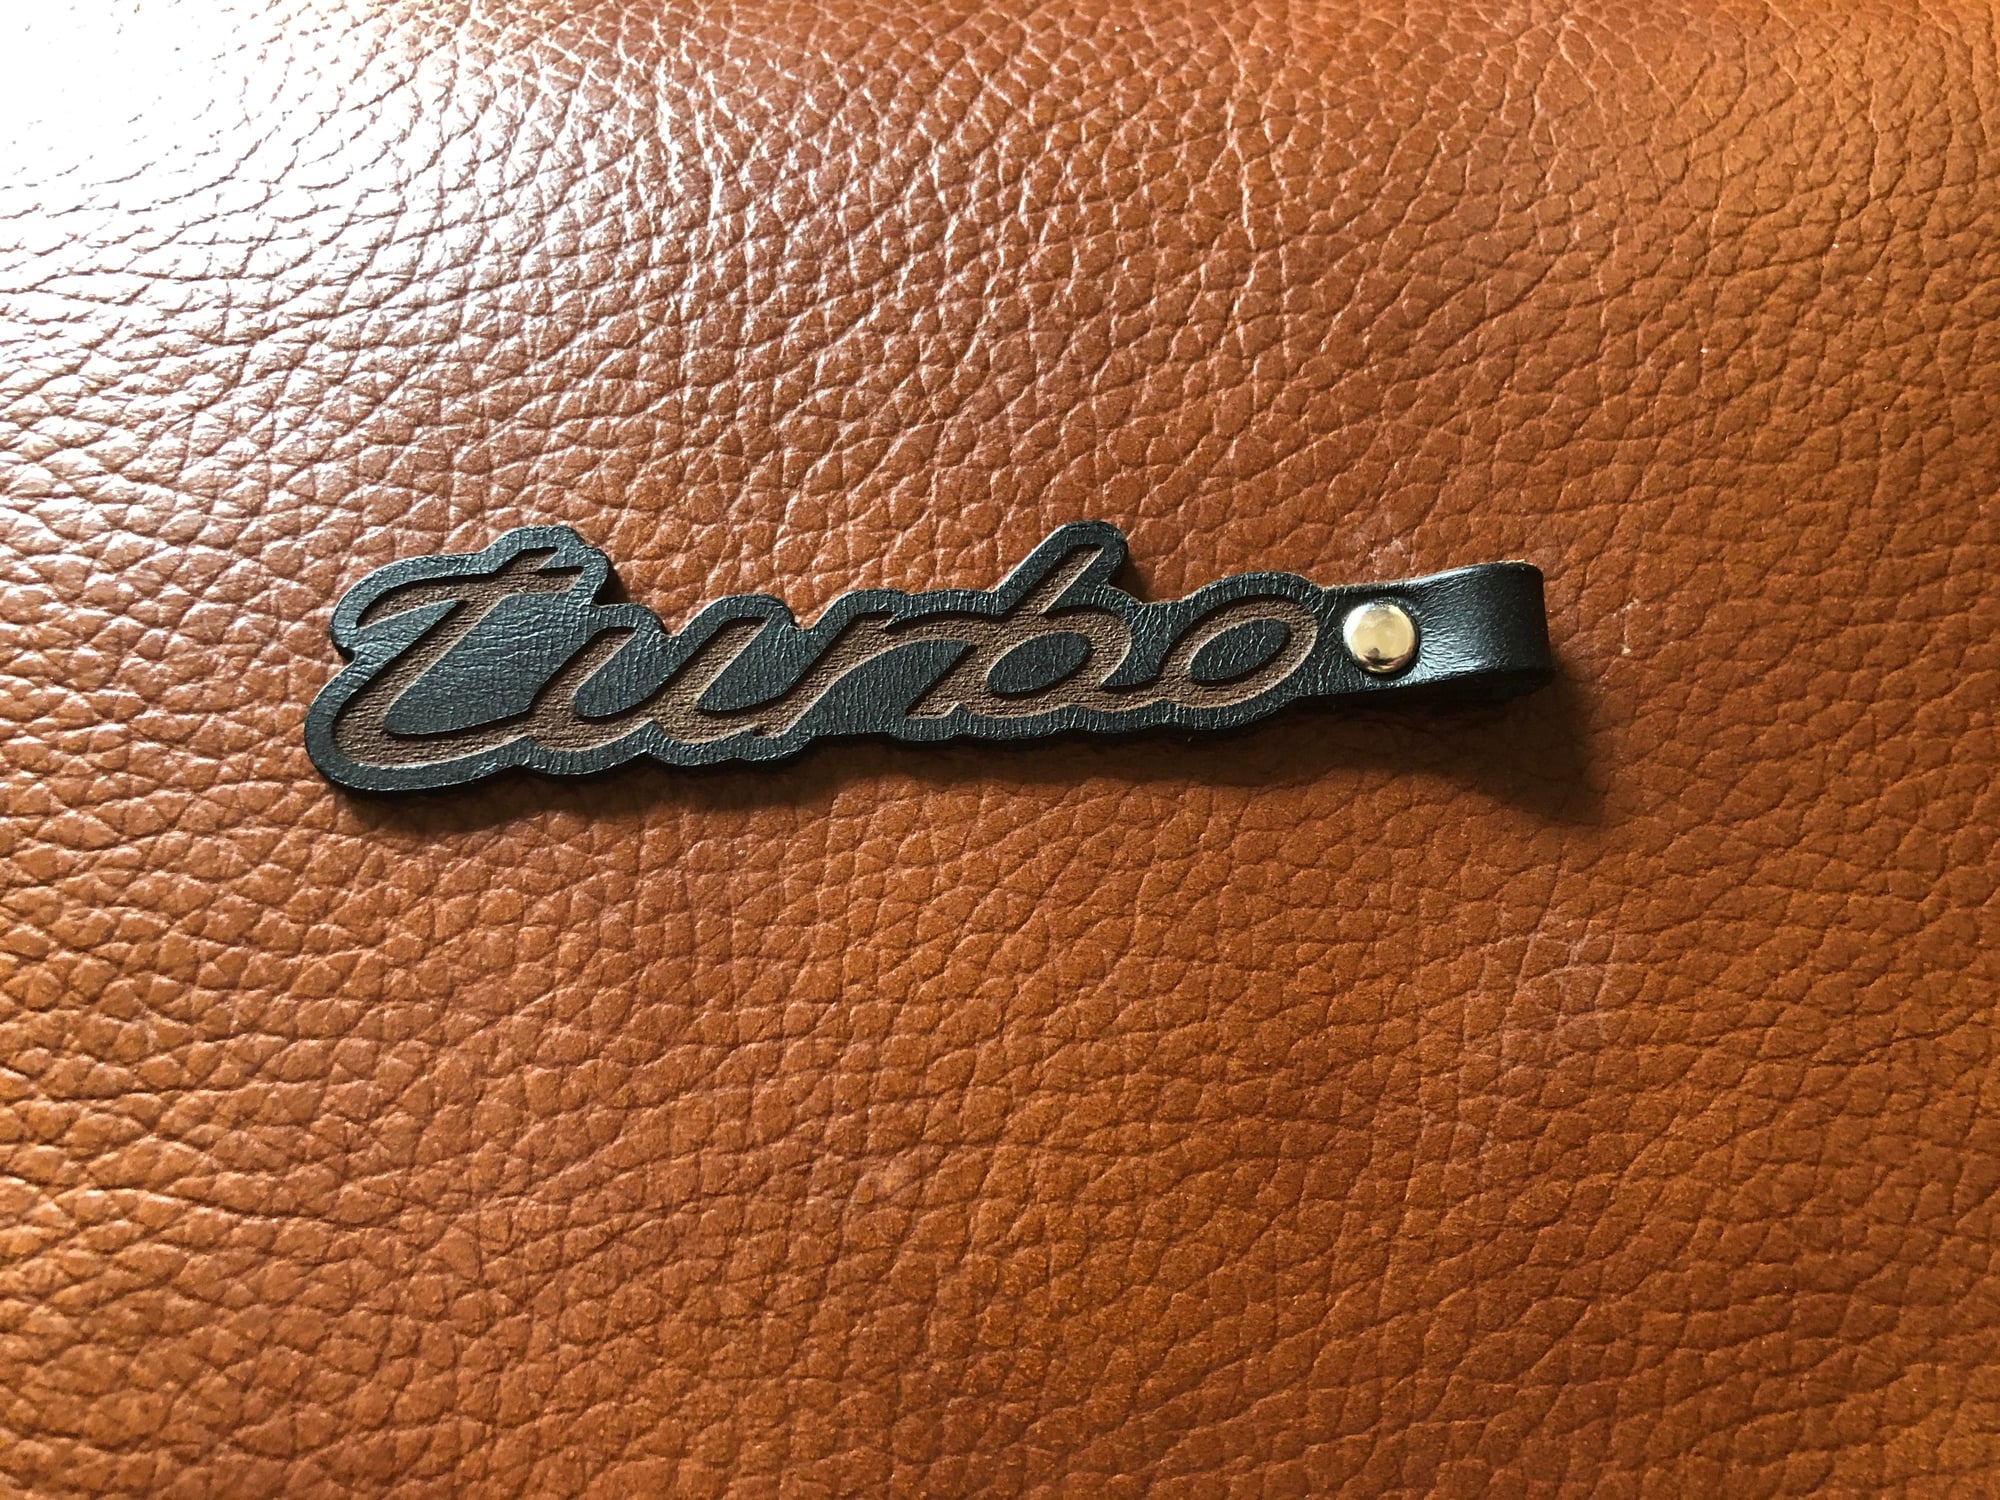 Accessories - Porsche keychains and key fob leather cases - Used - 1964 to 2020 Porsche All Models - Campbell, CA 95008, United States